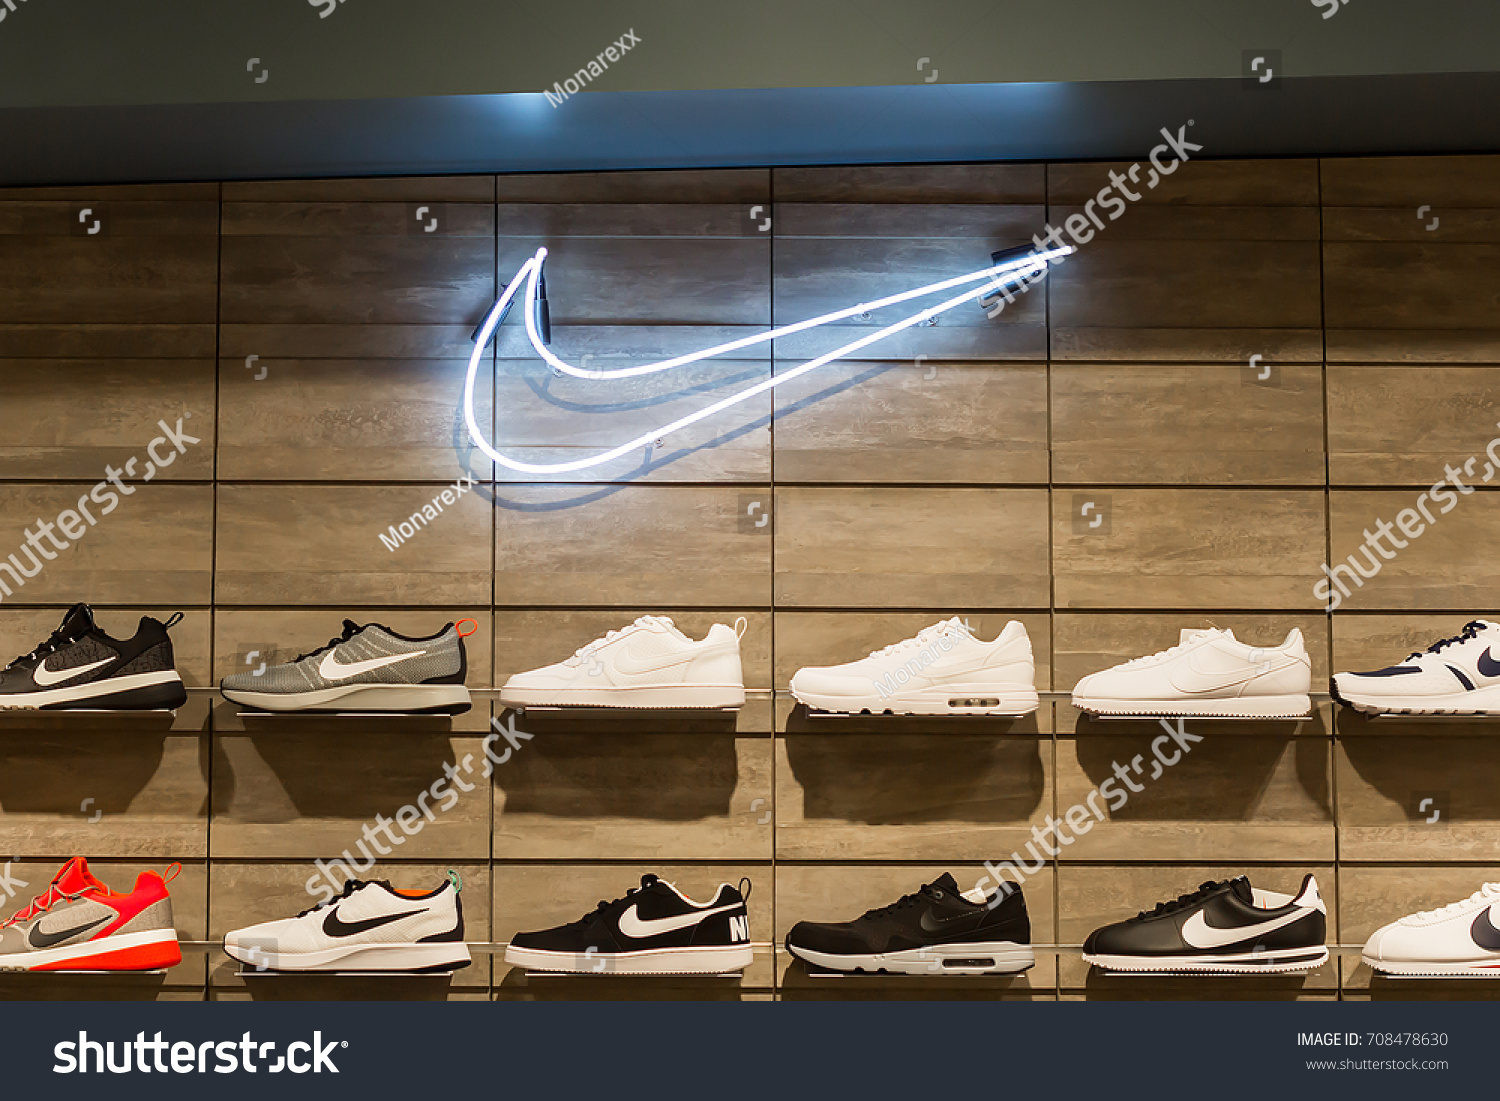 nike central store